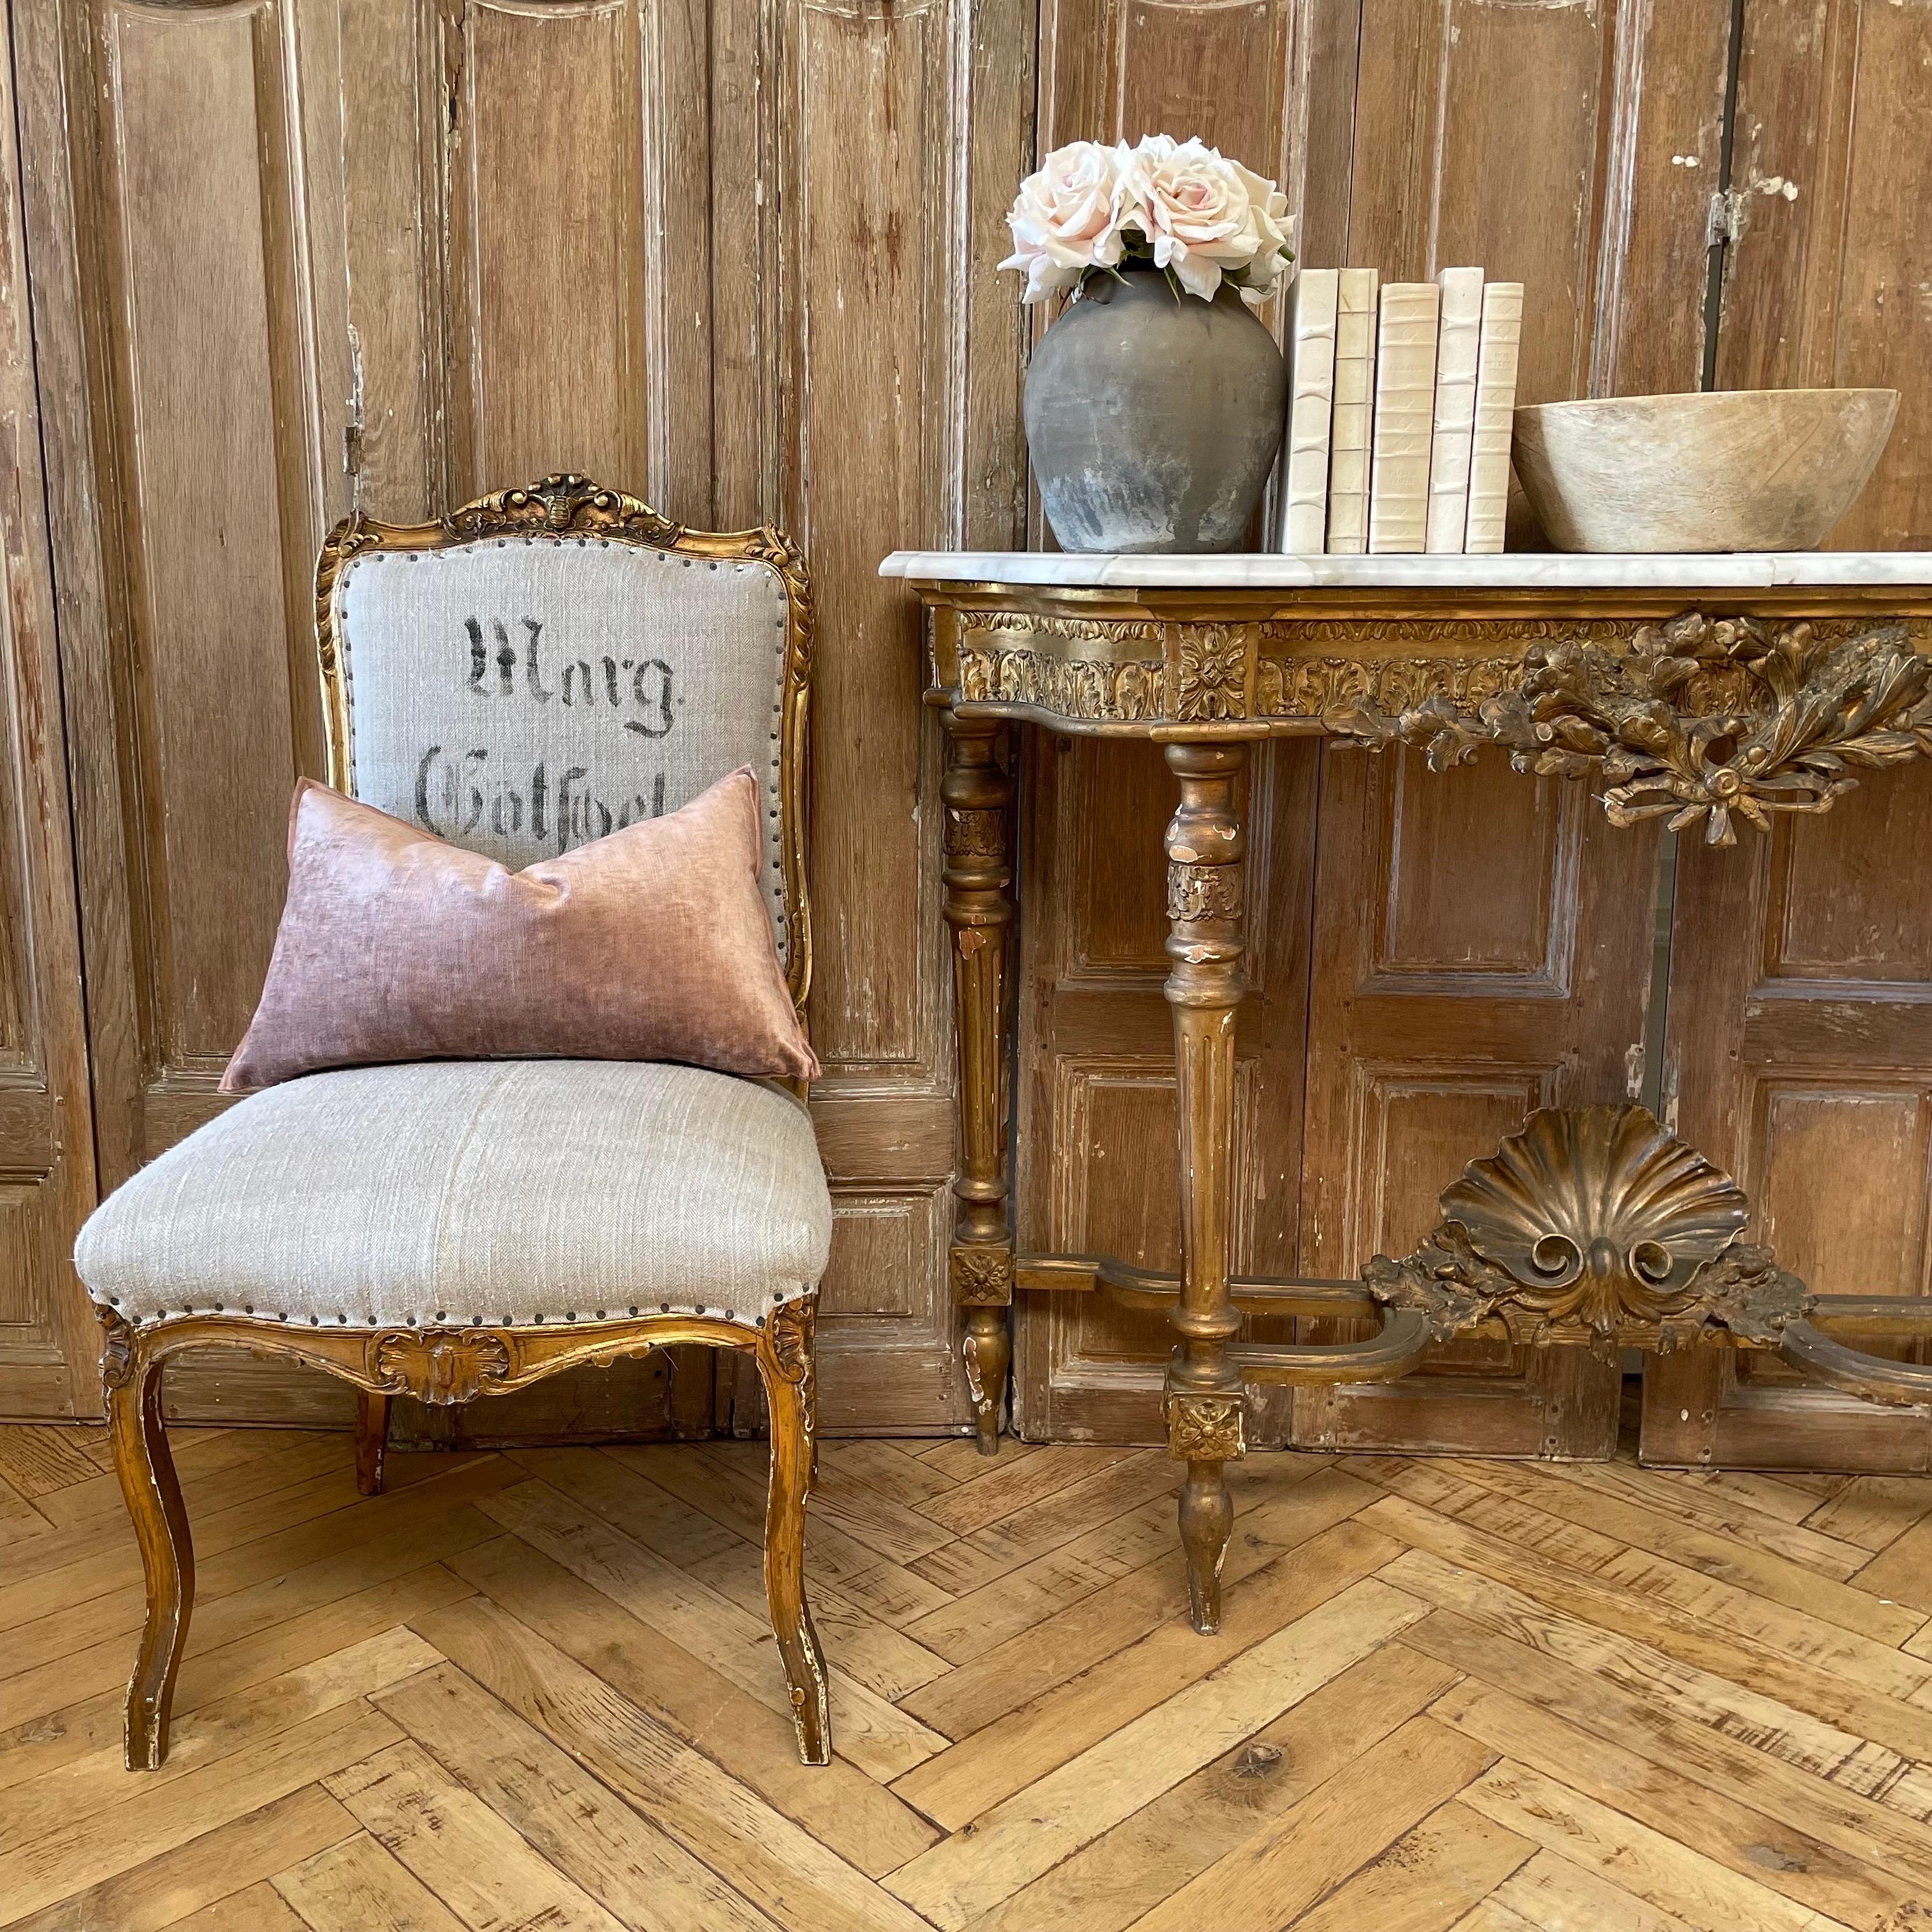 Antique Giltwood French Louis XV style chair with custom upholstery in vintage european grain sack with original stamping.  Gilt wood finish is original with subtle scuffs and weathering.
Heavy flax colored linen and antique nail trim finish.  This